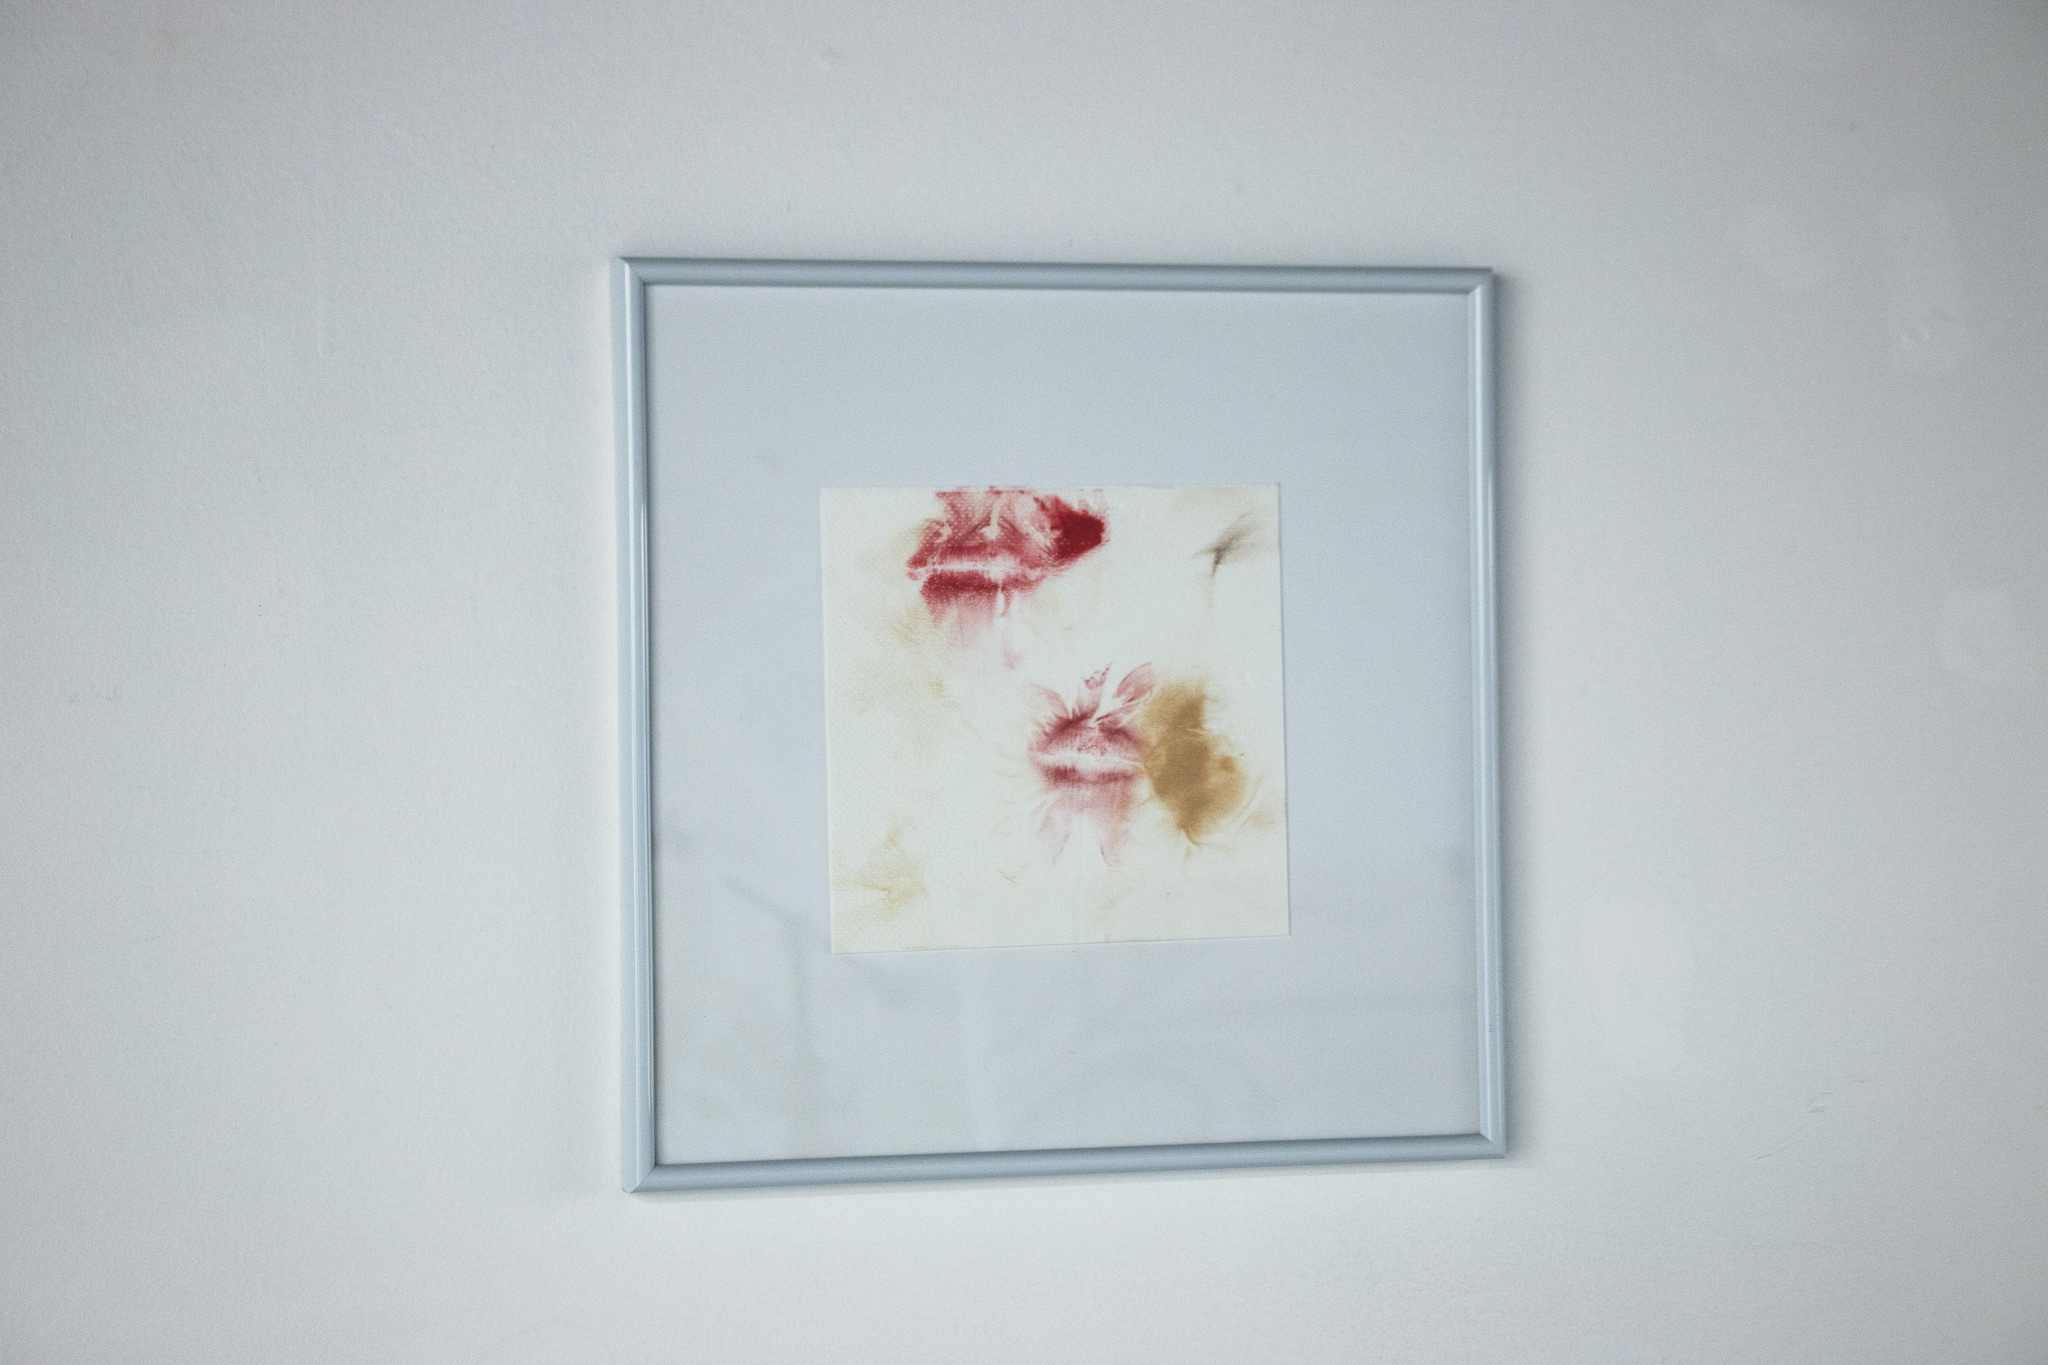  Connor Kelly’s “f*@ck me she’s gorgeous” leaves us with remnants from a night out– phone numbers and solicitations scribbled with lipstick on napkins, a sexy anticipation that is ultimately unfulfilled, a letdown of make-up smeared napkins in the wa